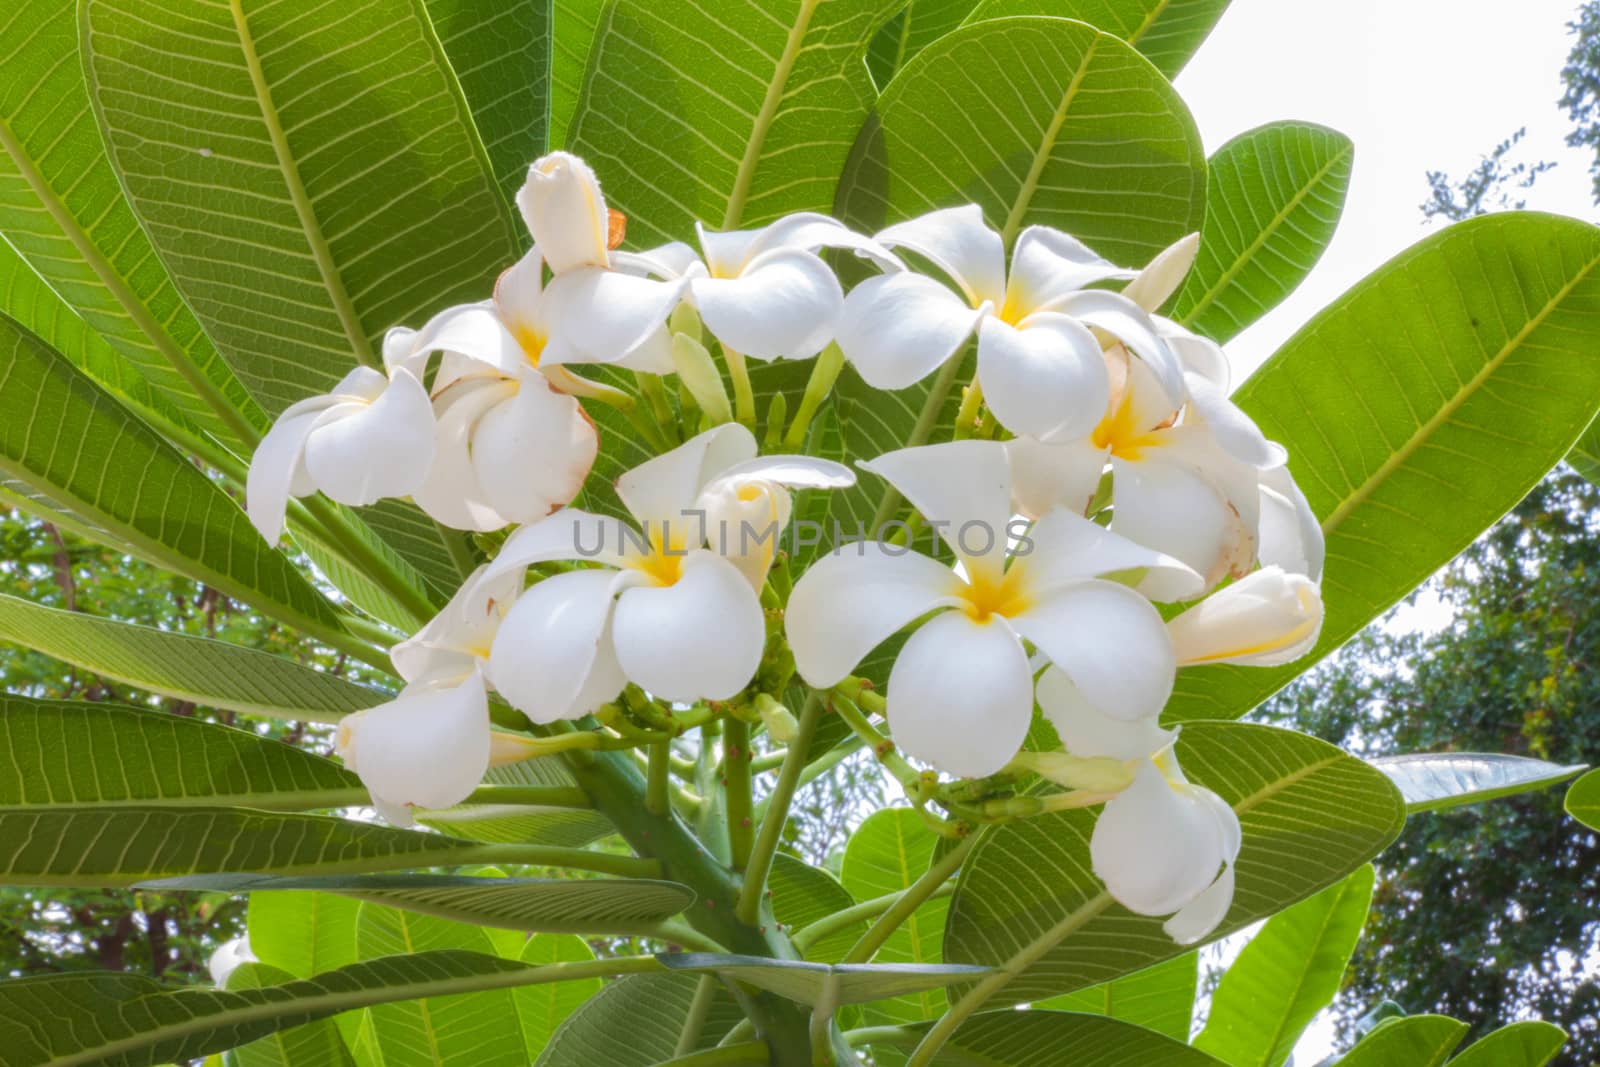 Plumeria (frangipani) flowers on tree in a sunny day.